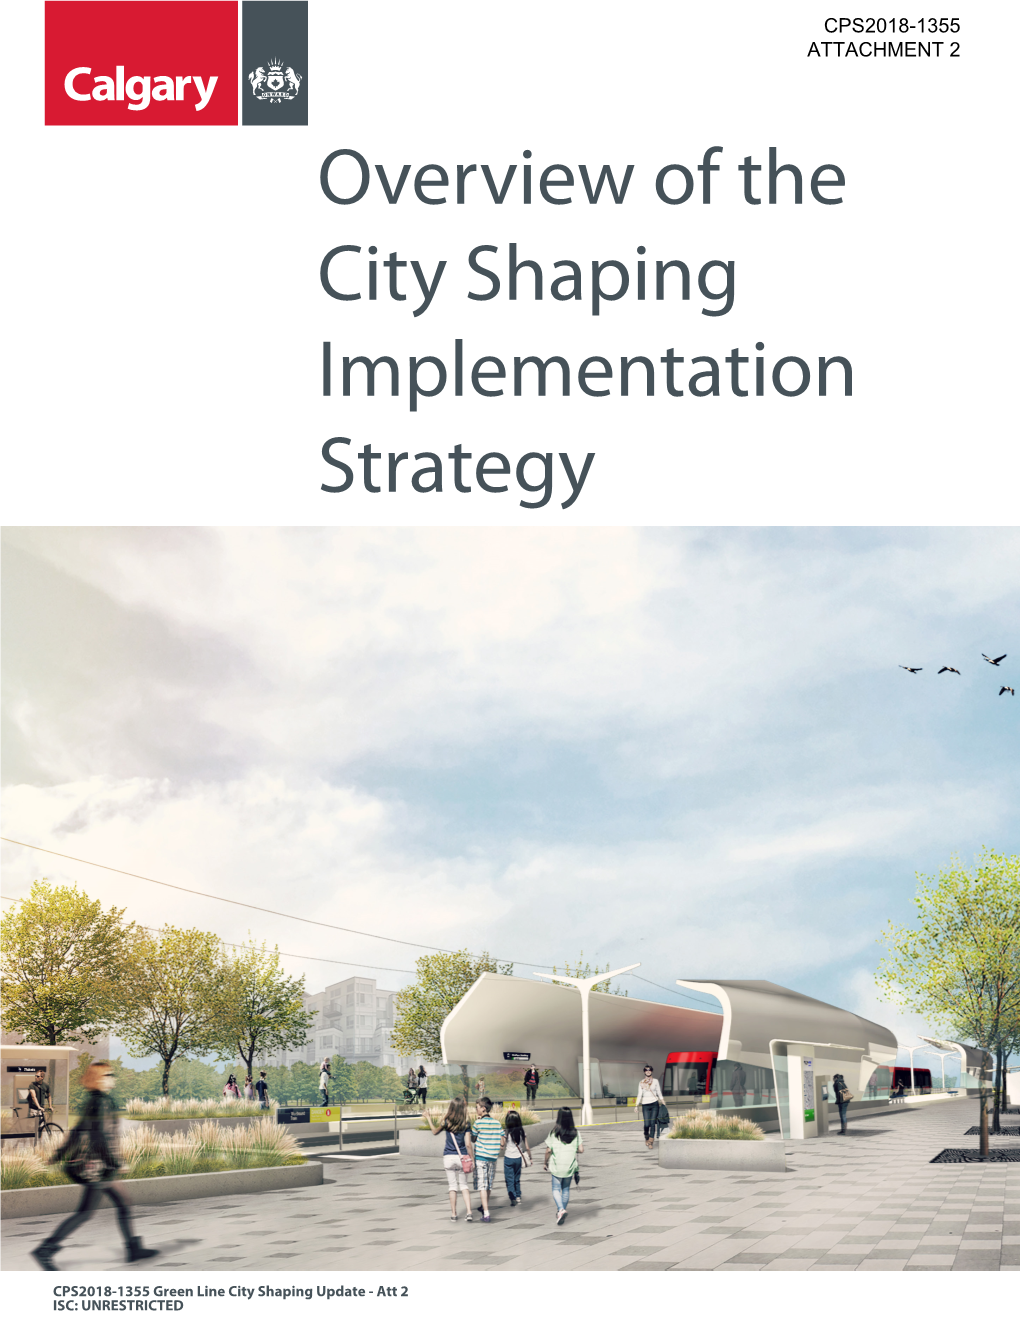 Overview of the City Shaping Implementation Strategy